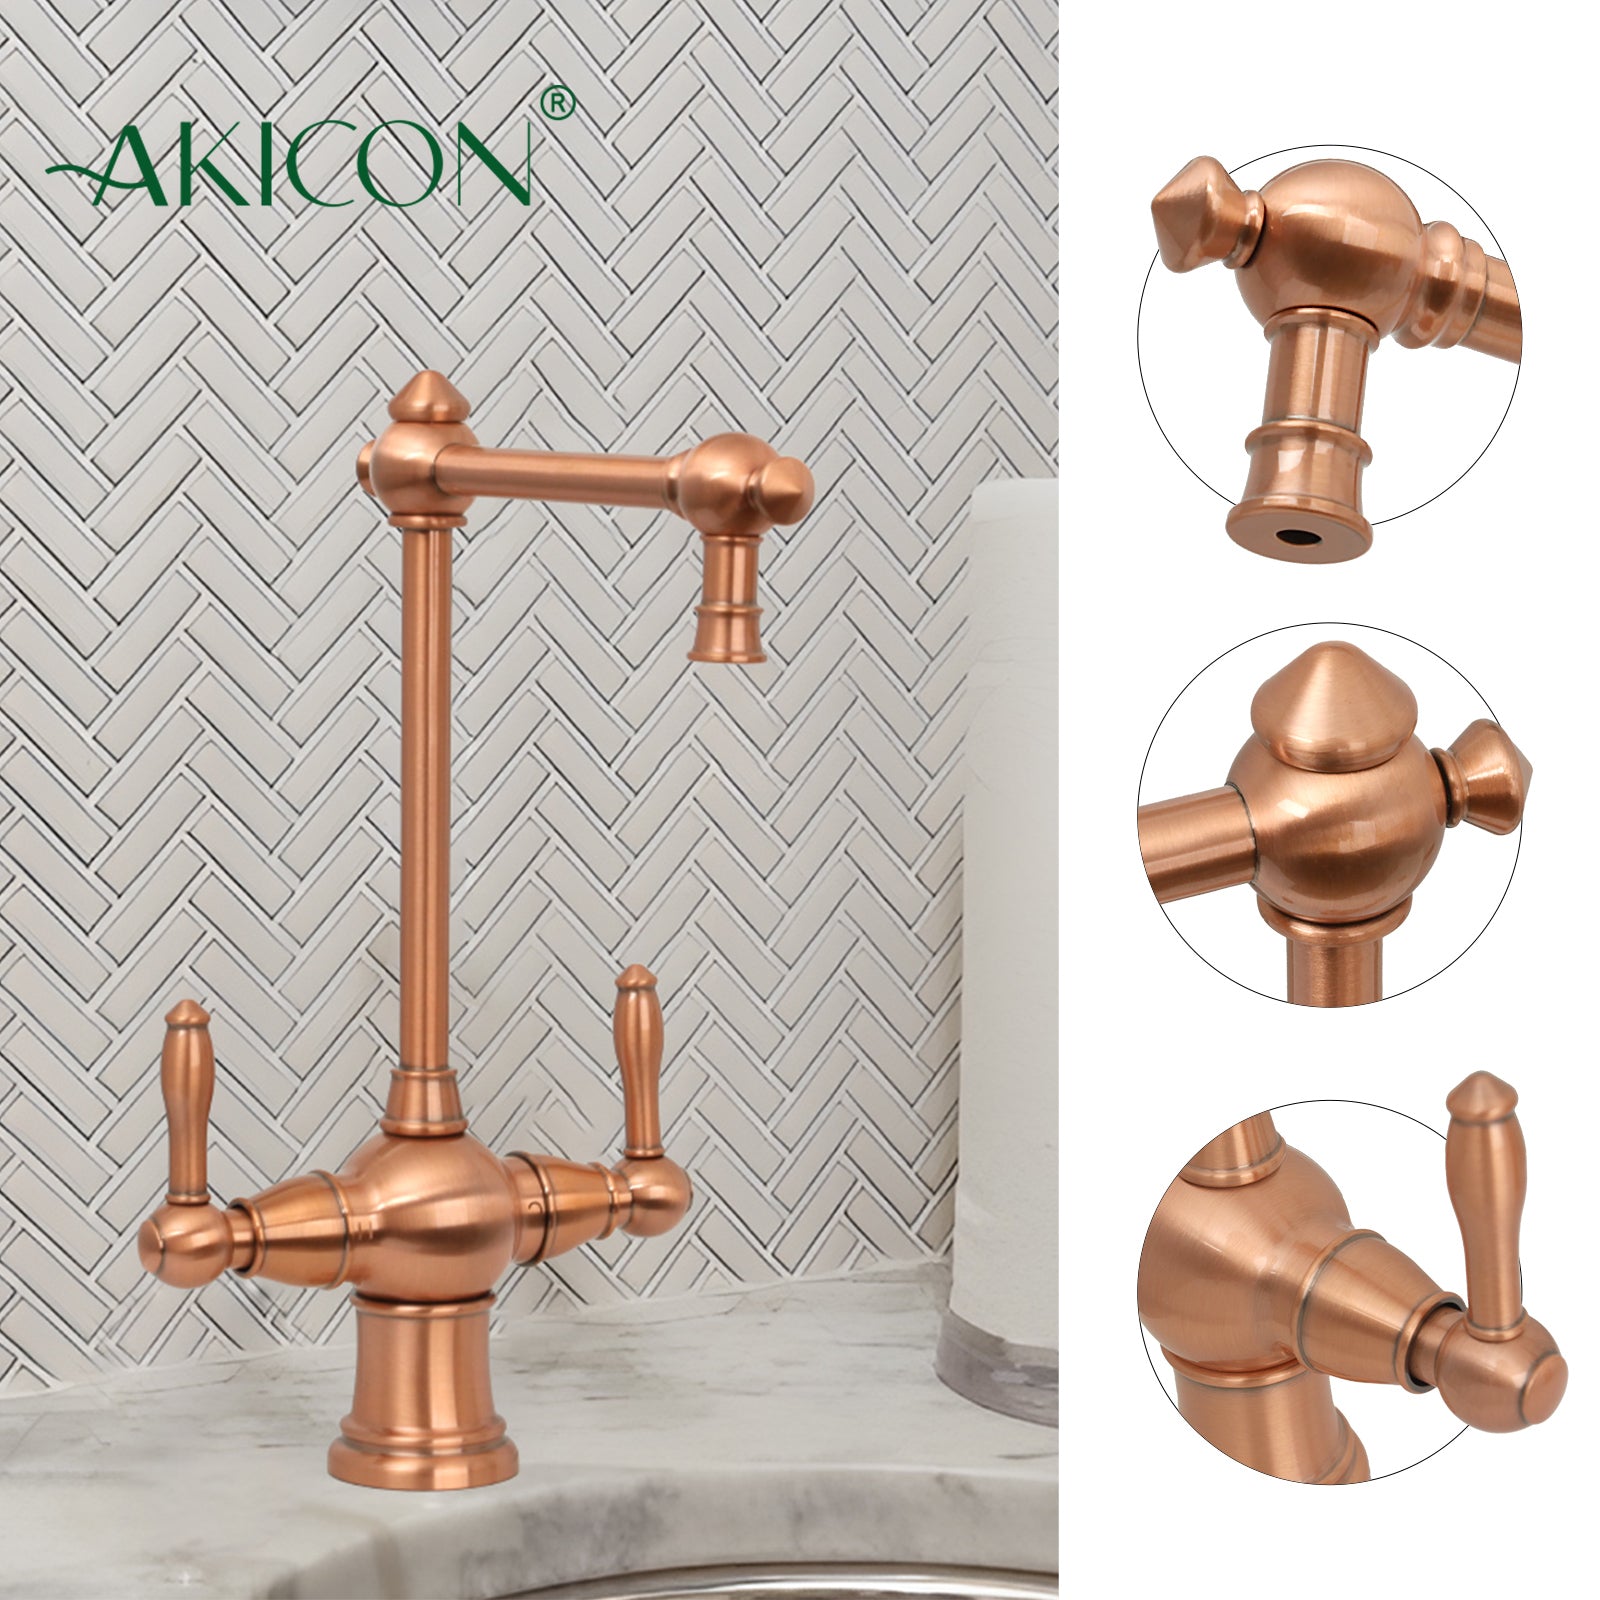 Two-Handles Copper Drinking Water Filter Faucet, Dual Lever Hot and Cold Water Faucet for Instant Hot Water Tank Dispenser & Filtration System-AK96218P1C